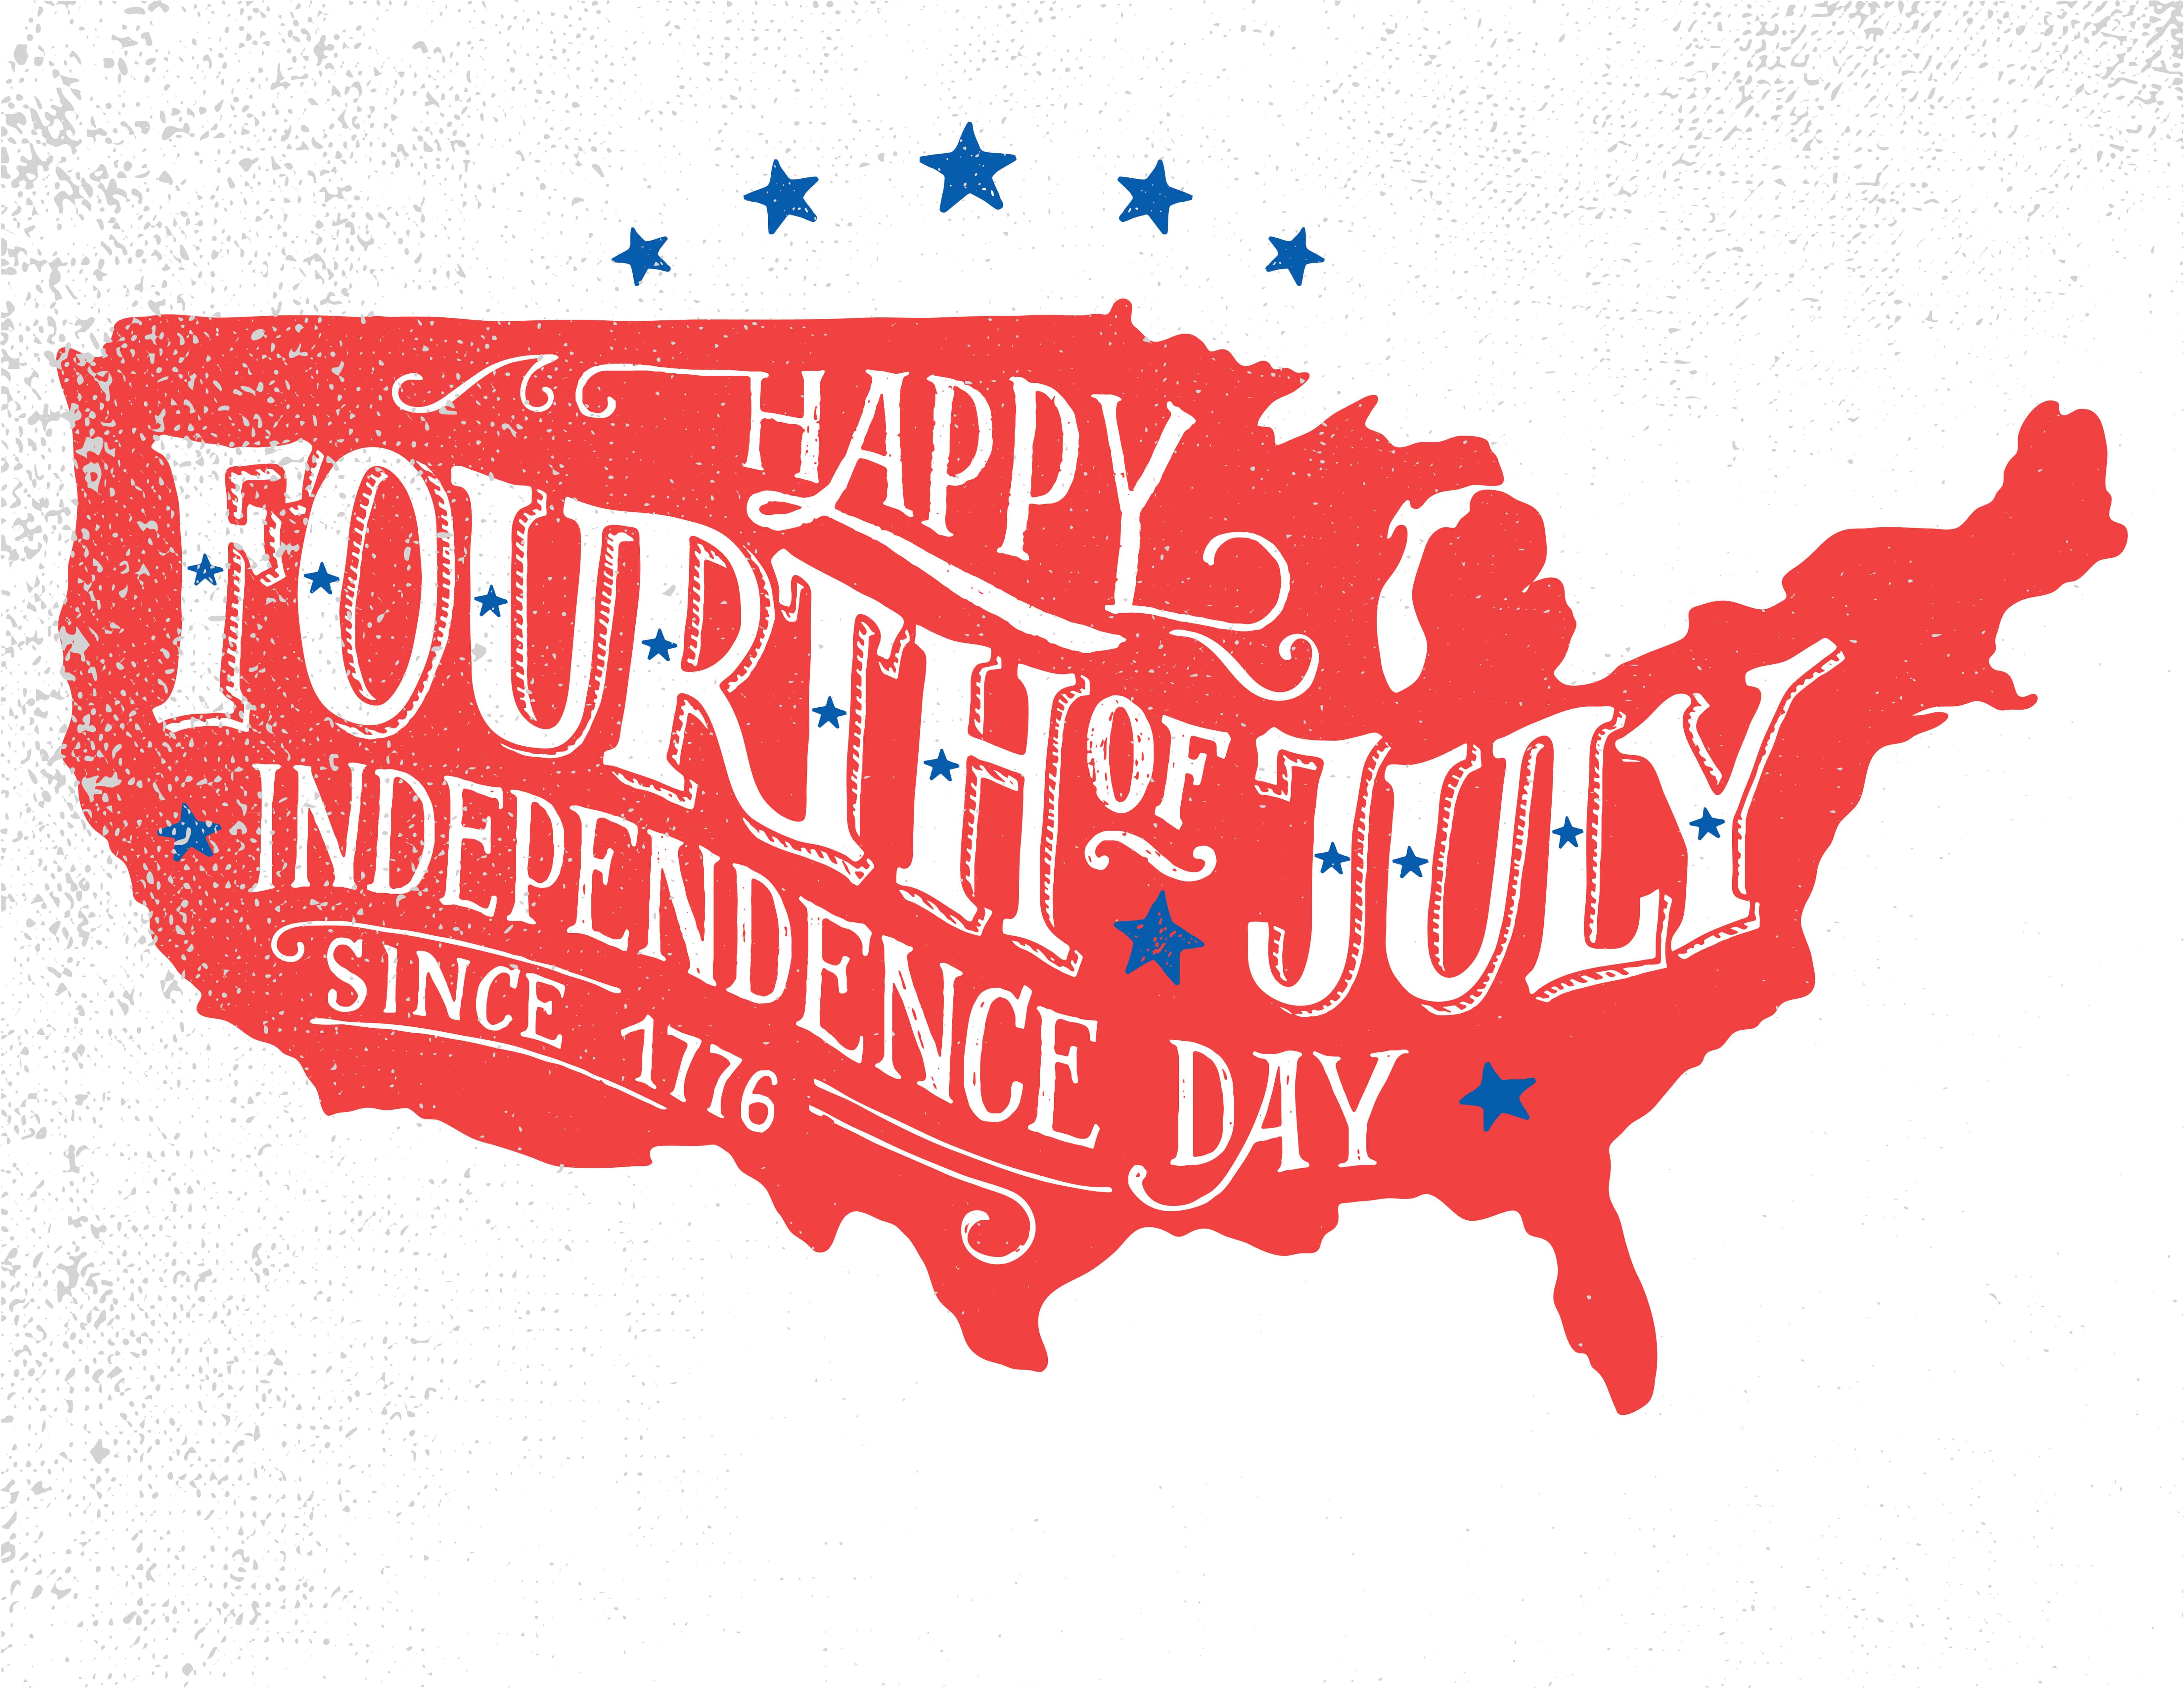 Office/Warehouse Closed in observance of the 4th of July Holiday